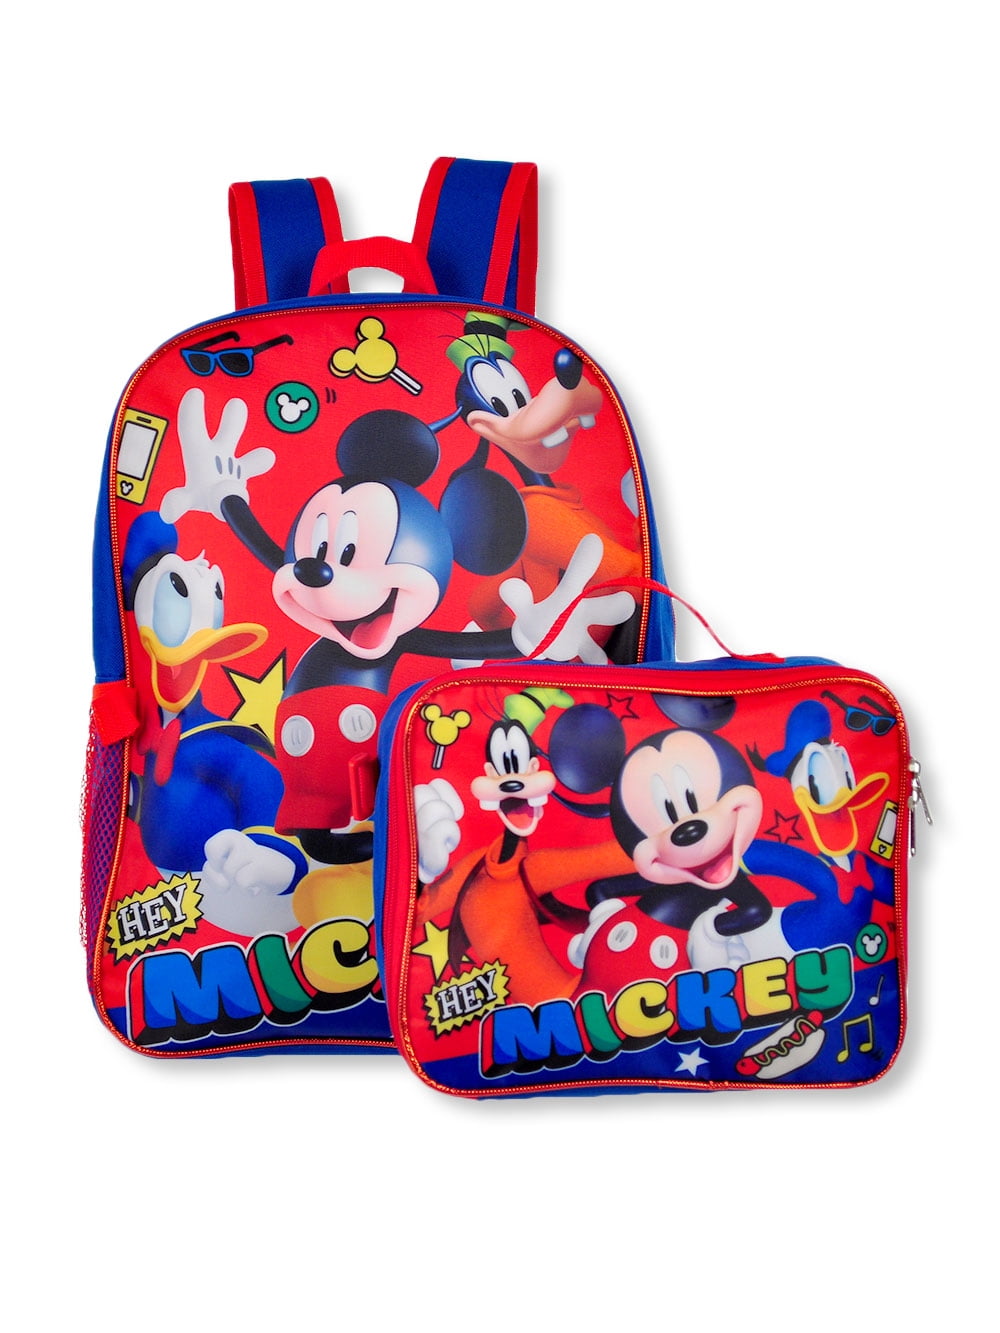 Super Mario Boys School Deluxe Backpack Lunch box Book Bag SET Kids Toy Gift 